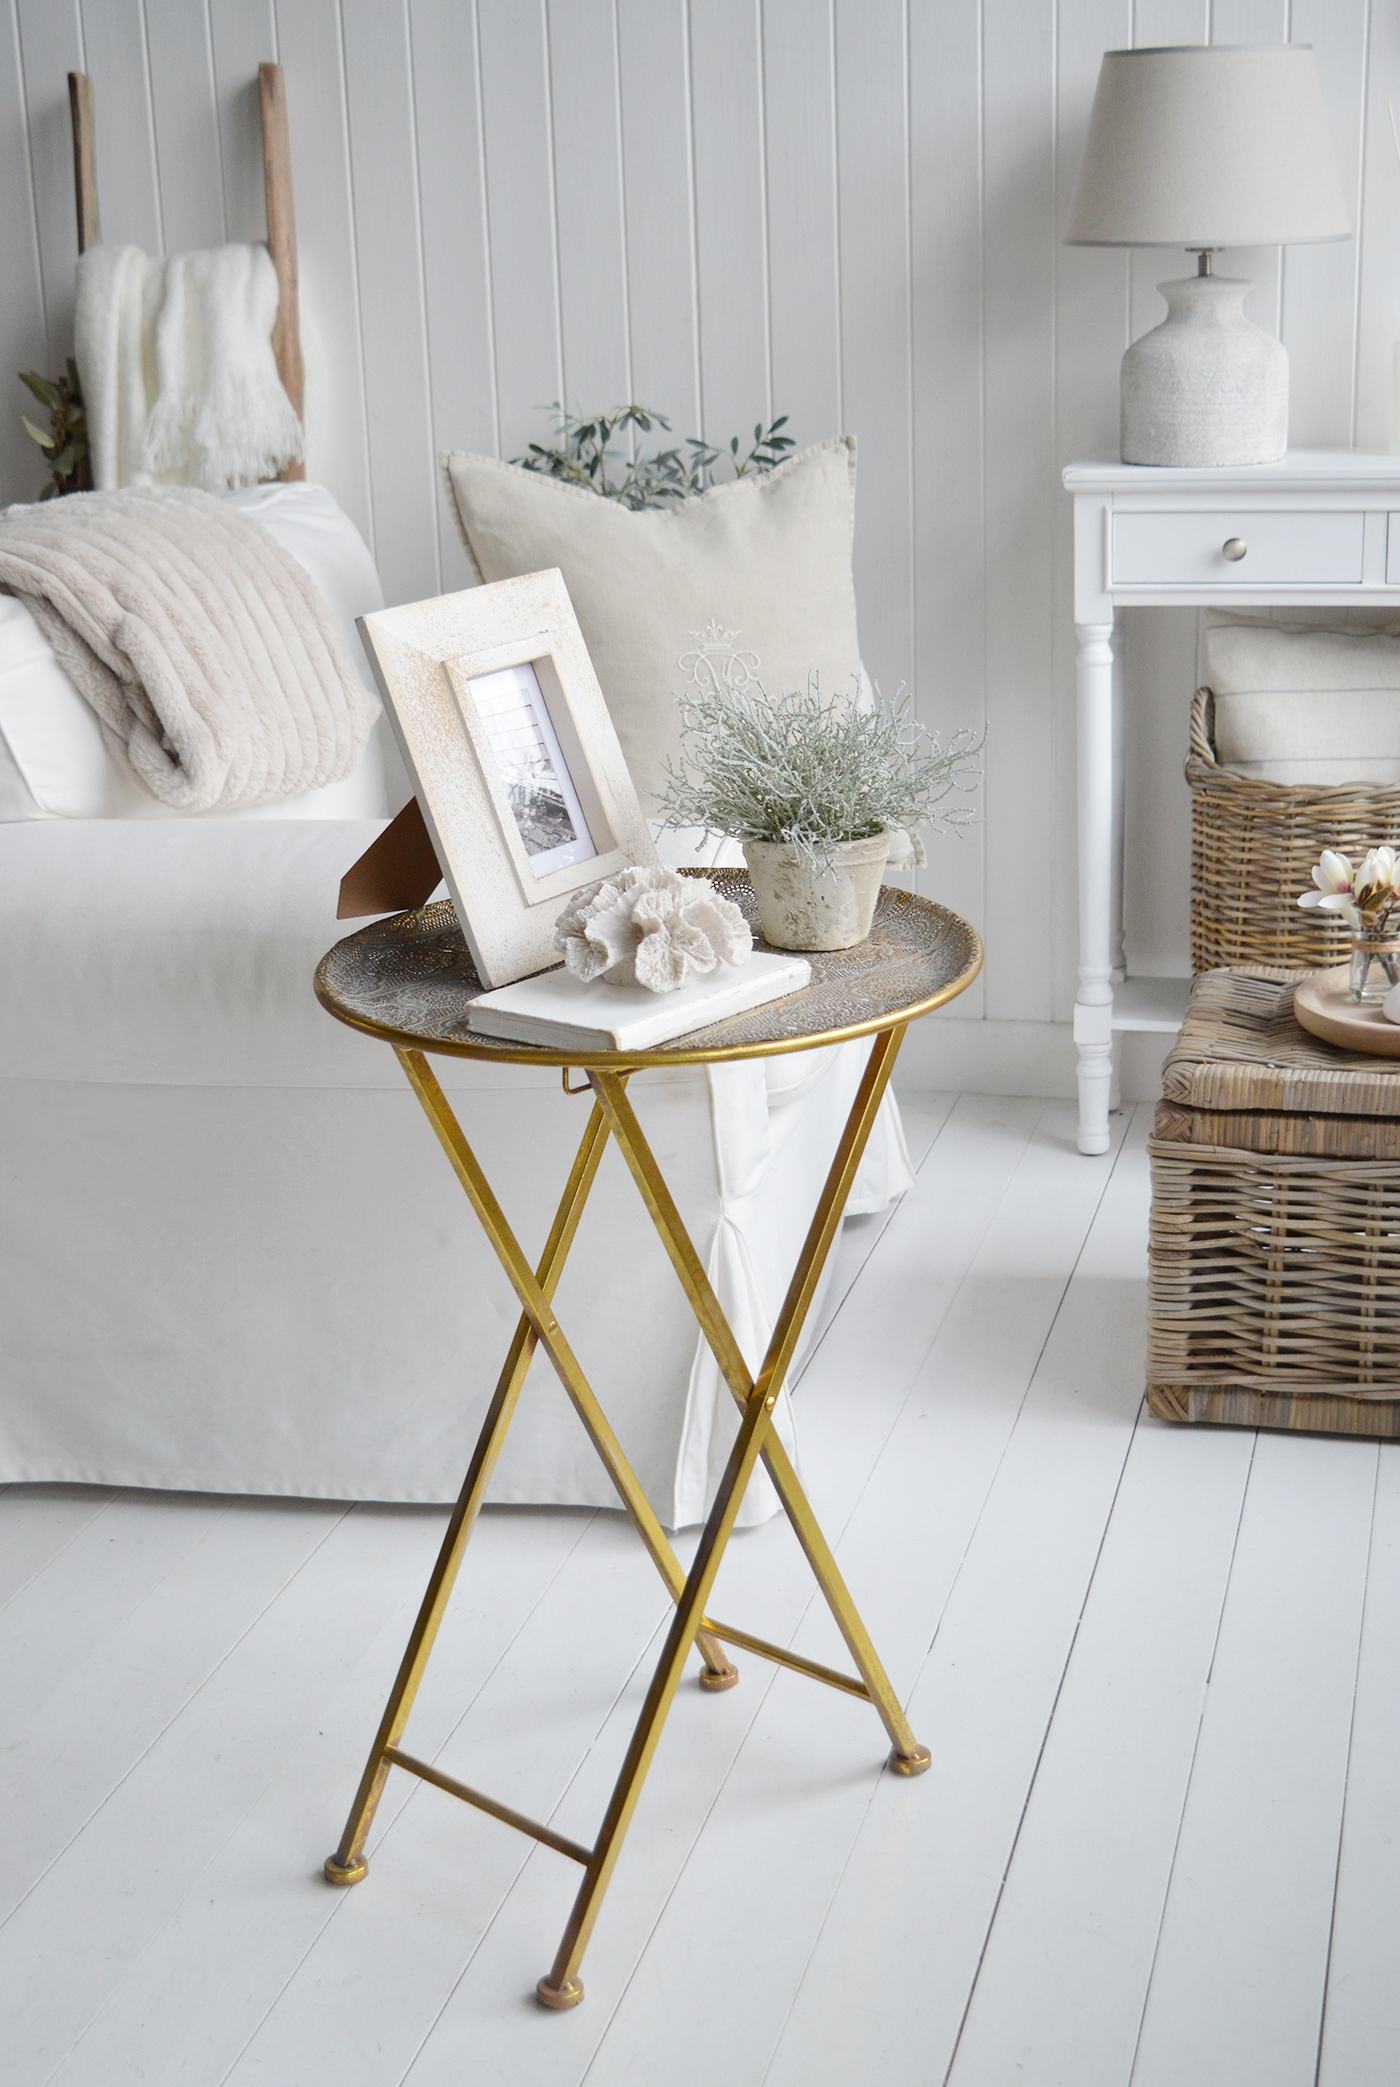 COntrasting Charleston antue gold table agains the neutral Hamptons living room interior decor